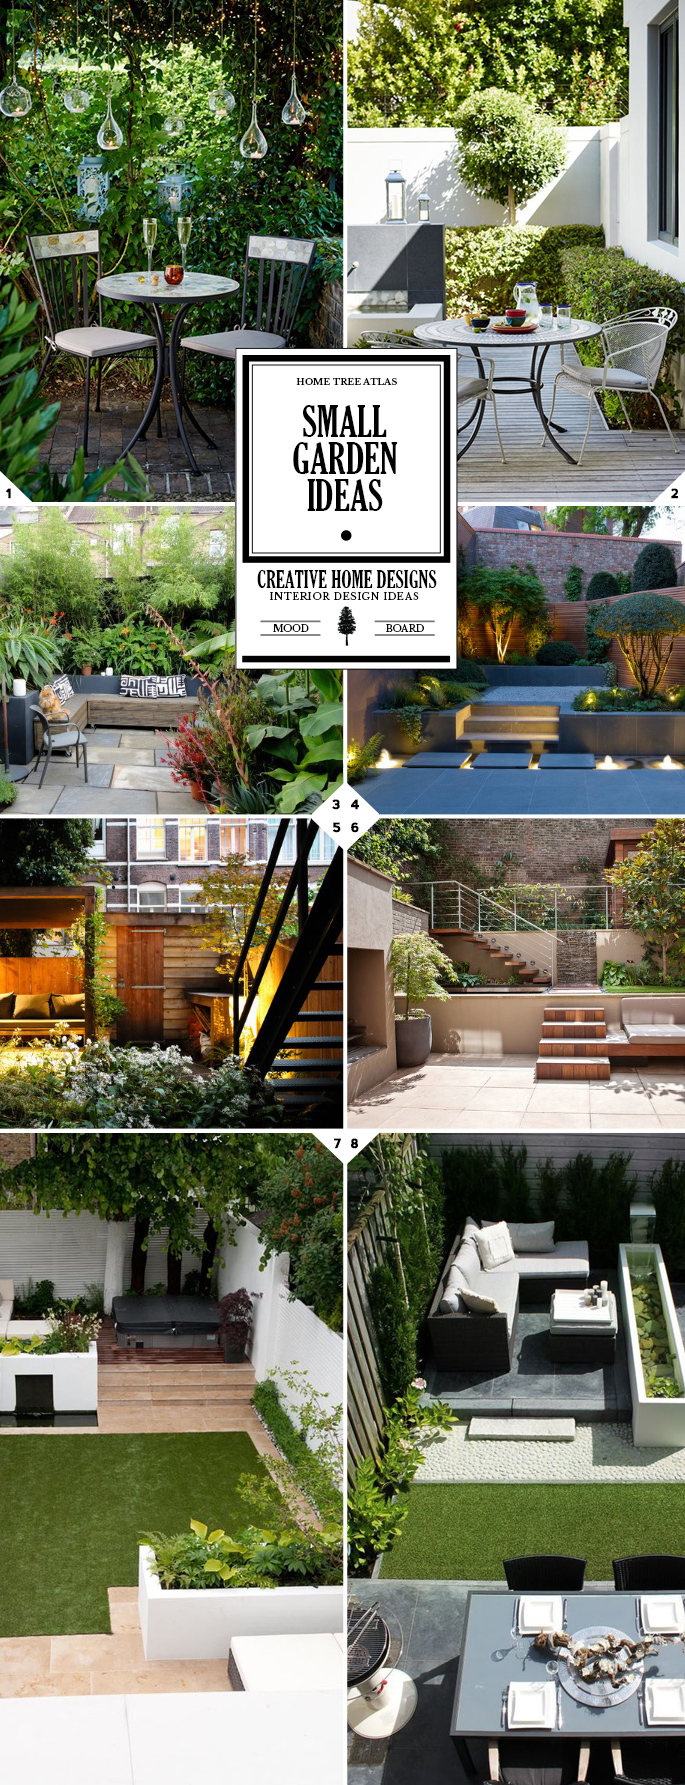 Small Garden Ideas and Designs: Making The Most of Your Space